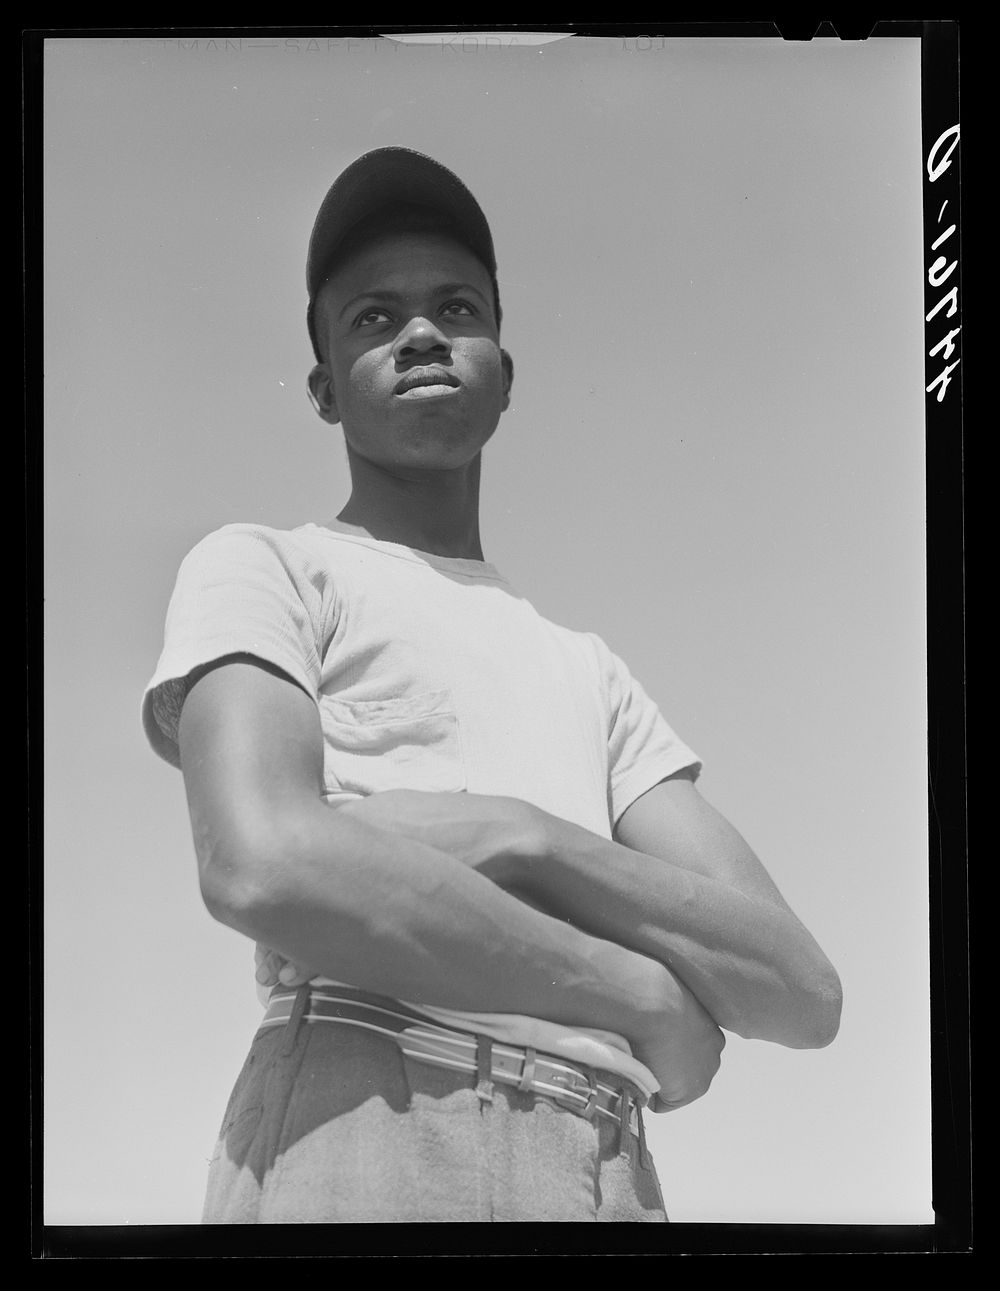 Son of a  tenant farmer. Greene County Georgia. Sourced from the Library of Congress.